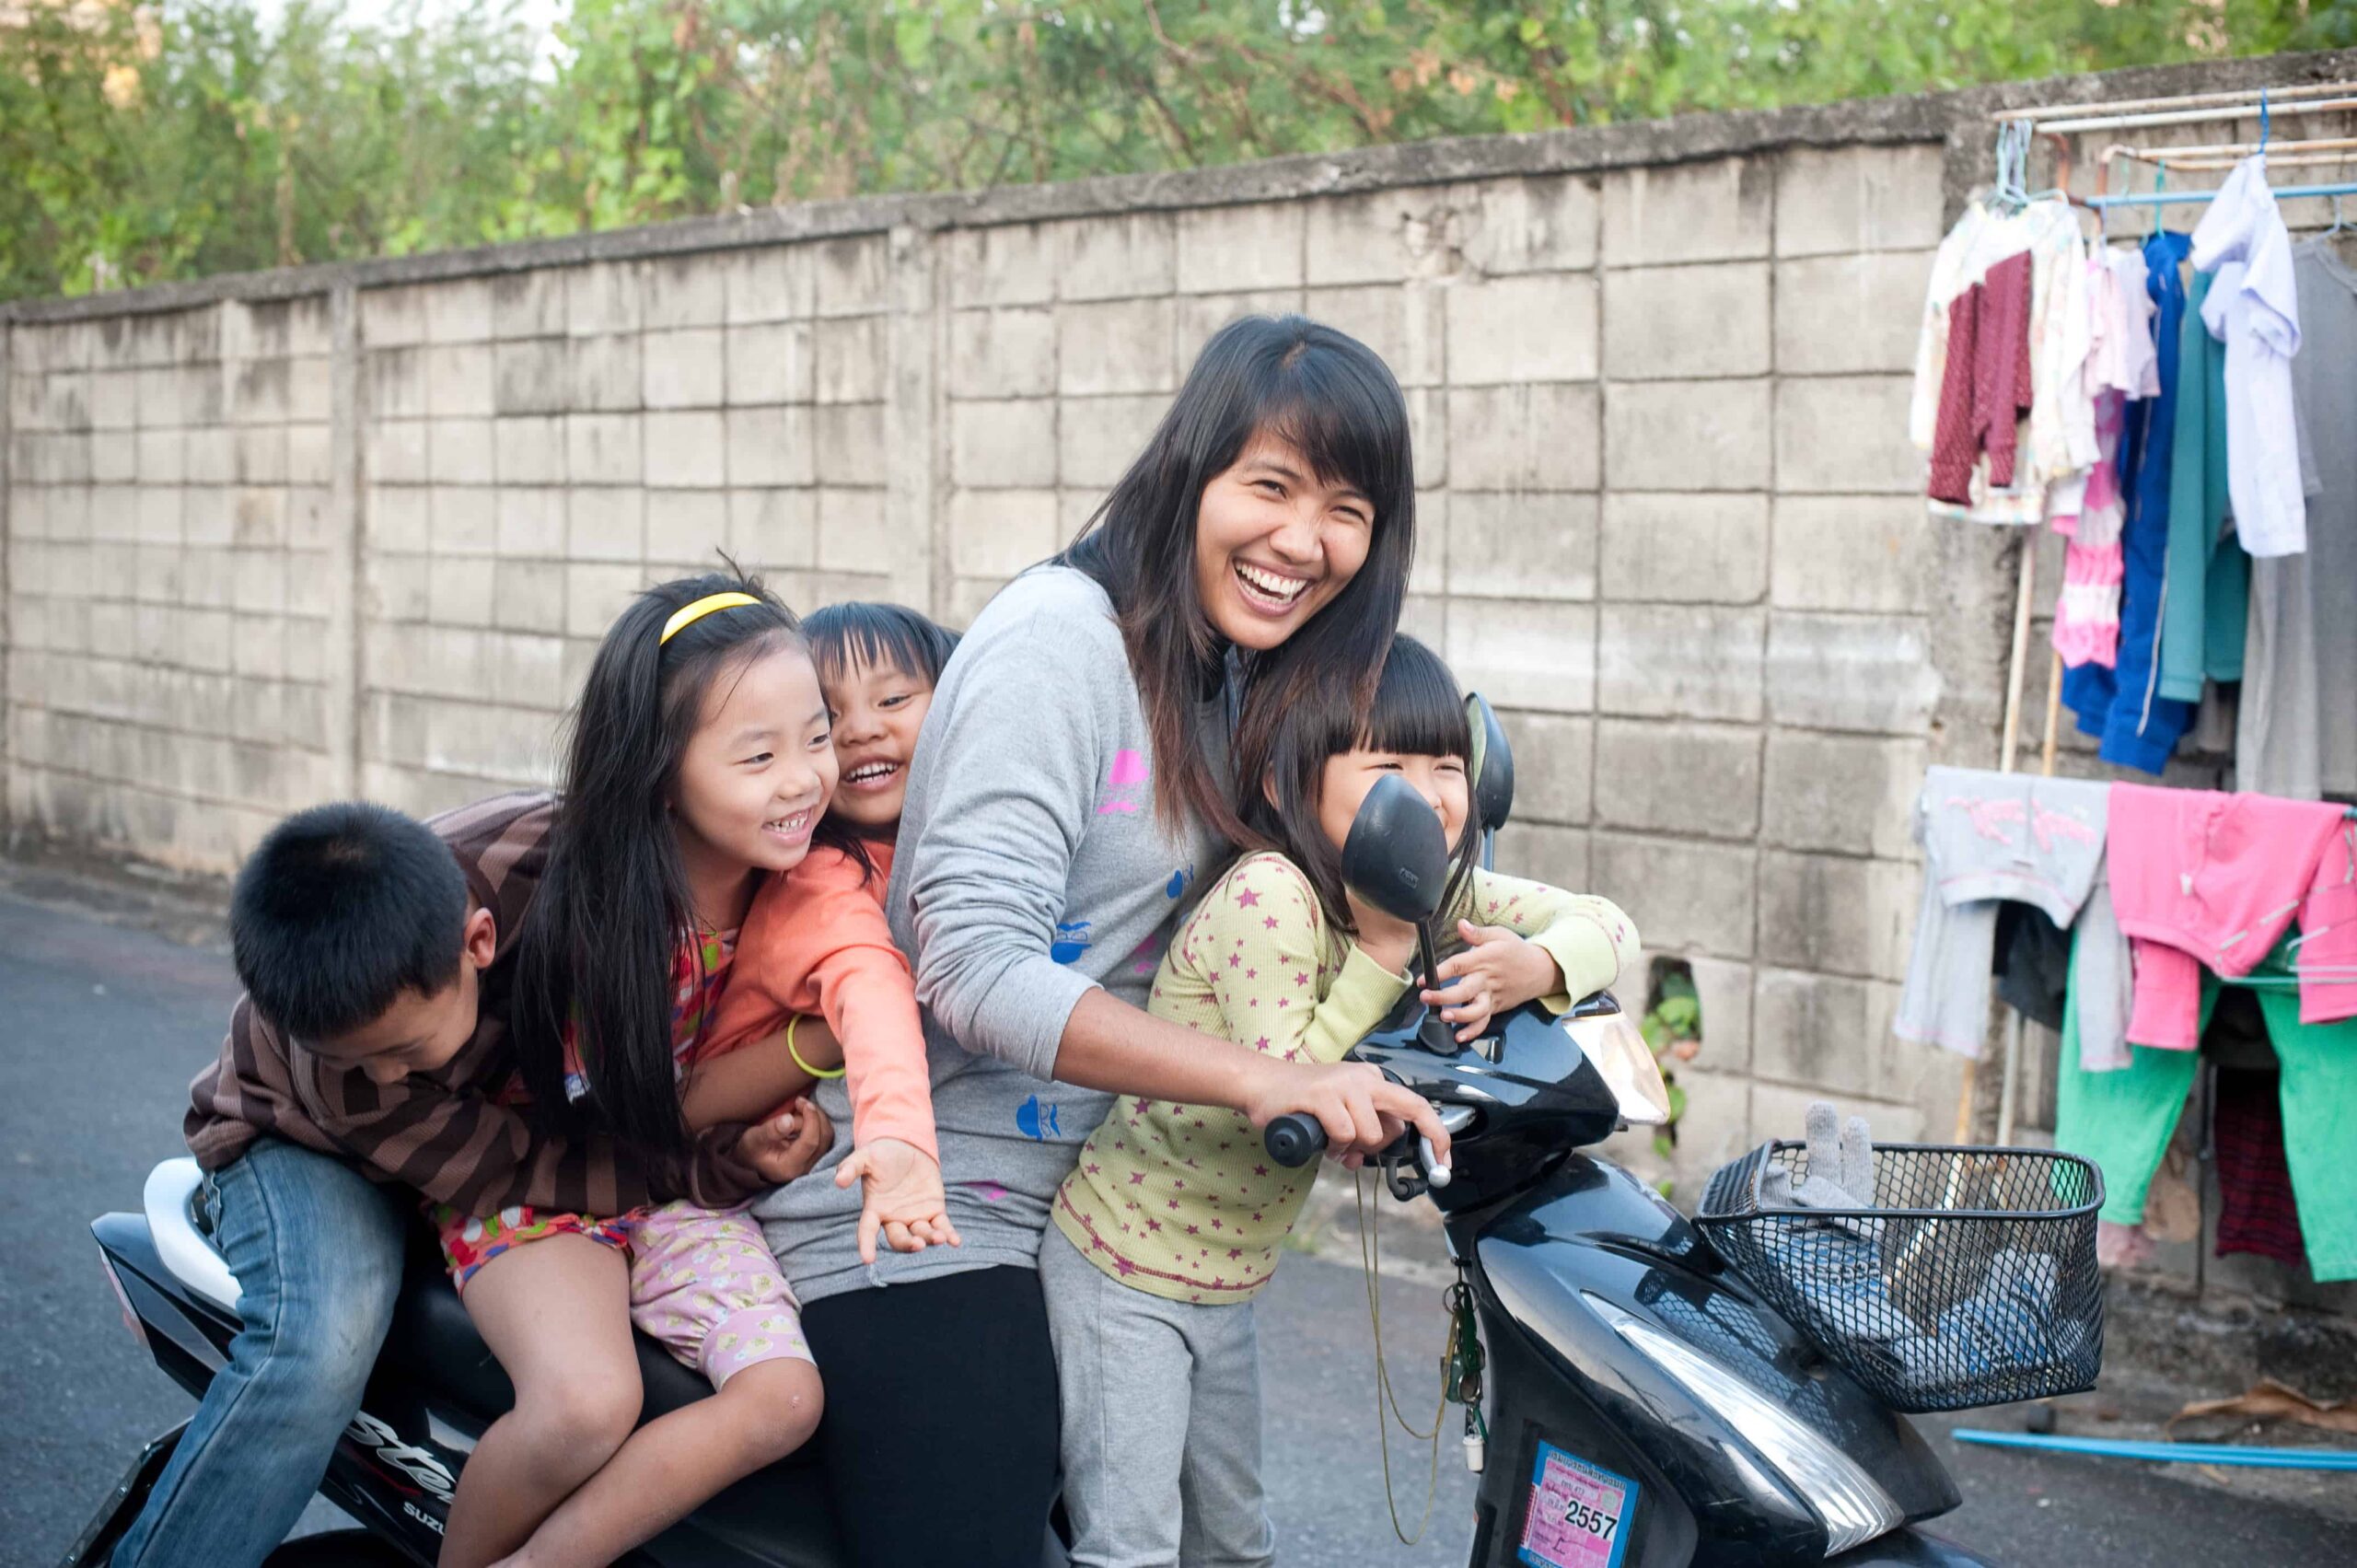 A woman on her motorbike with four children. They are laughing.